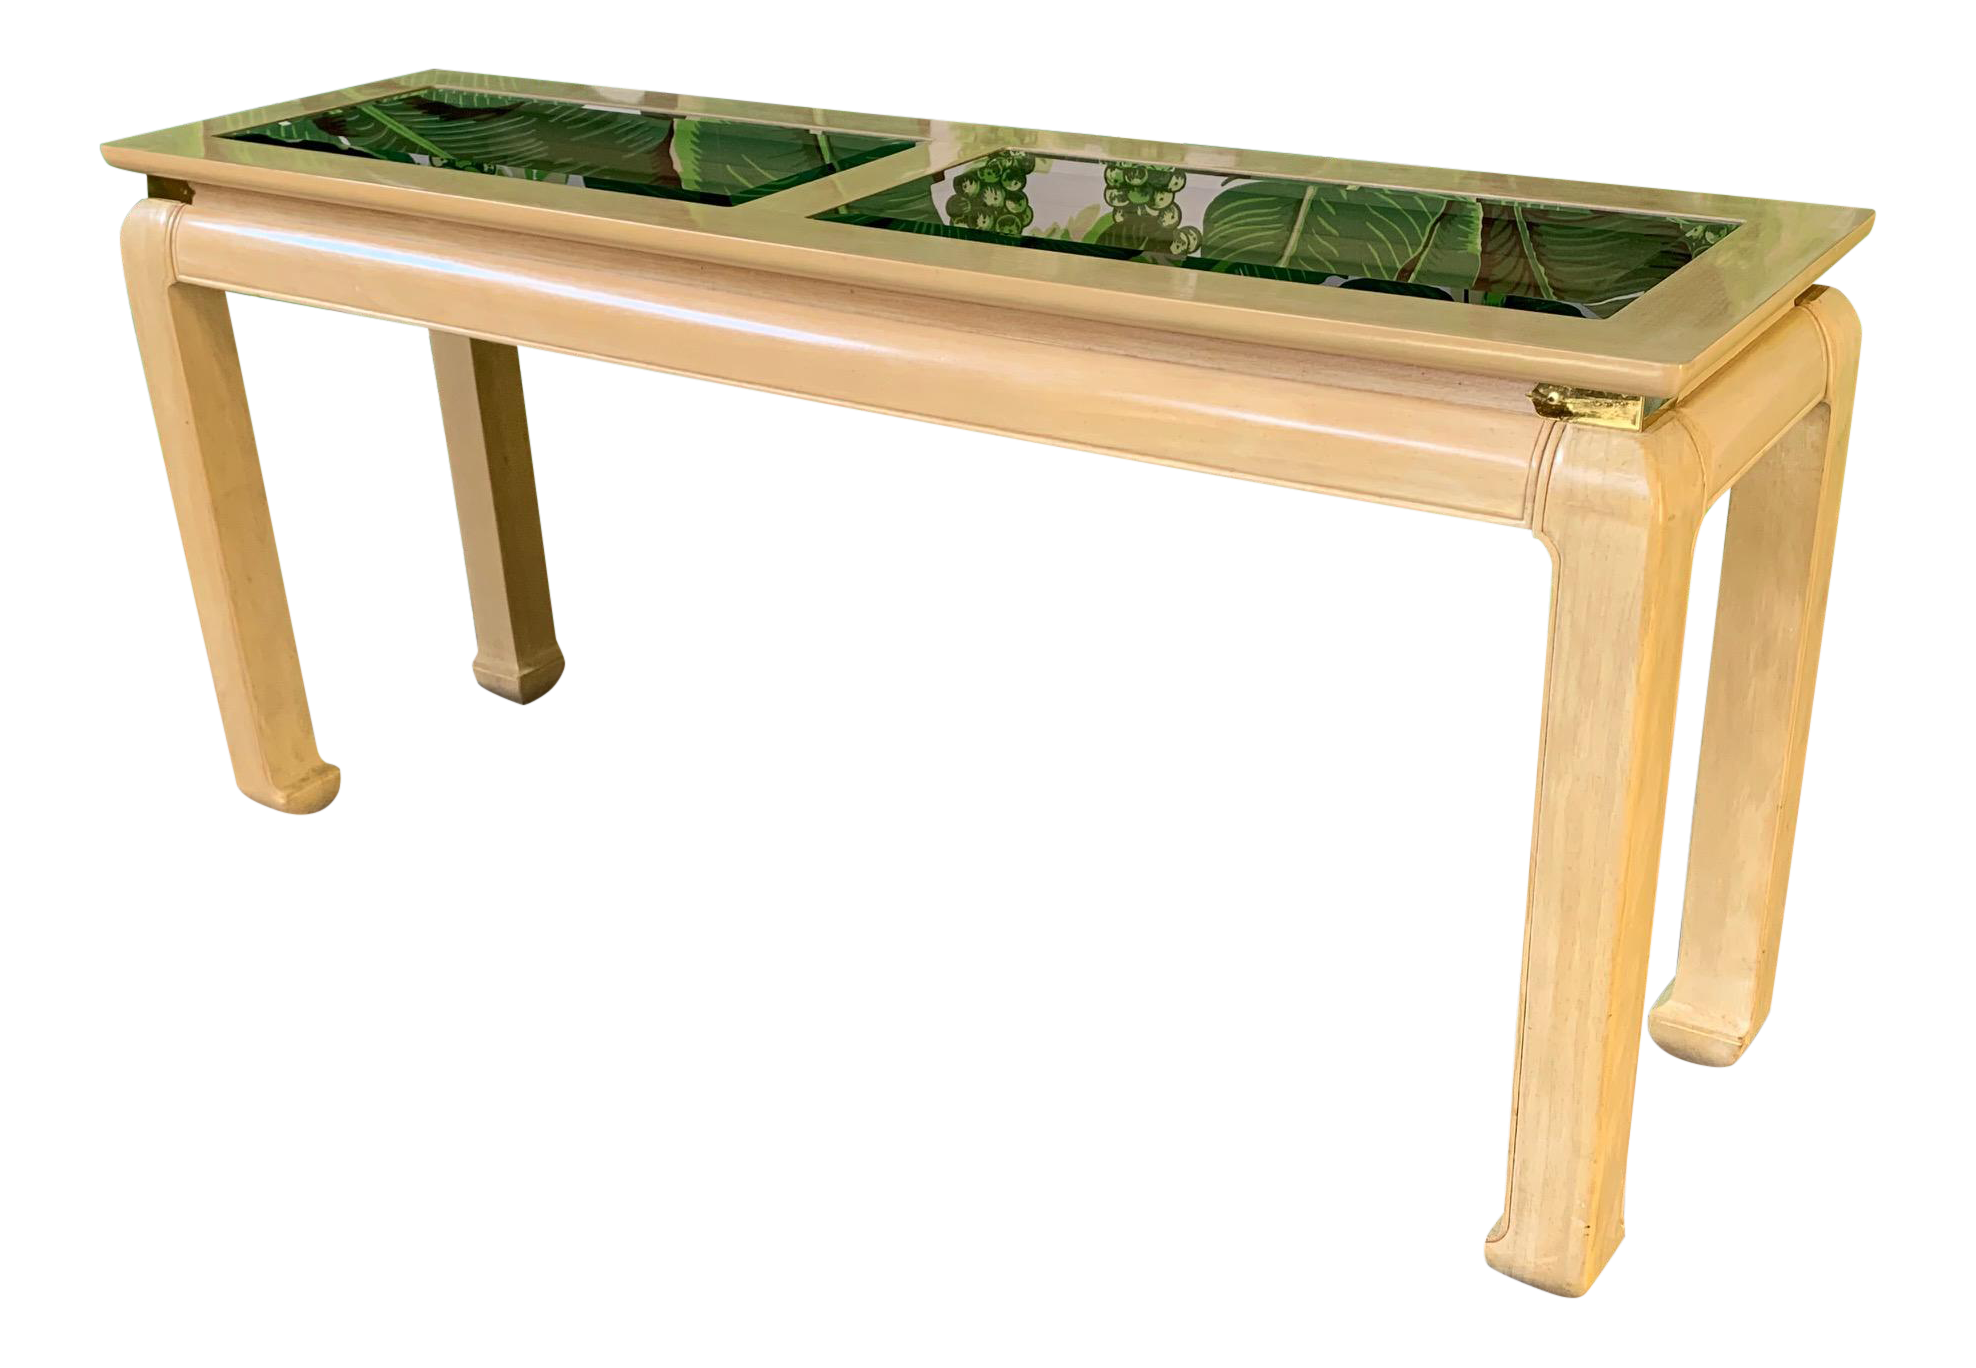 Ming Asian Console Table by Bernhardt